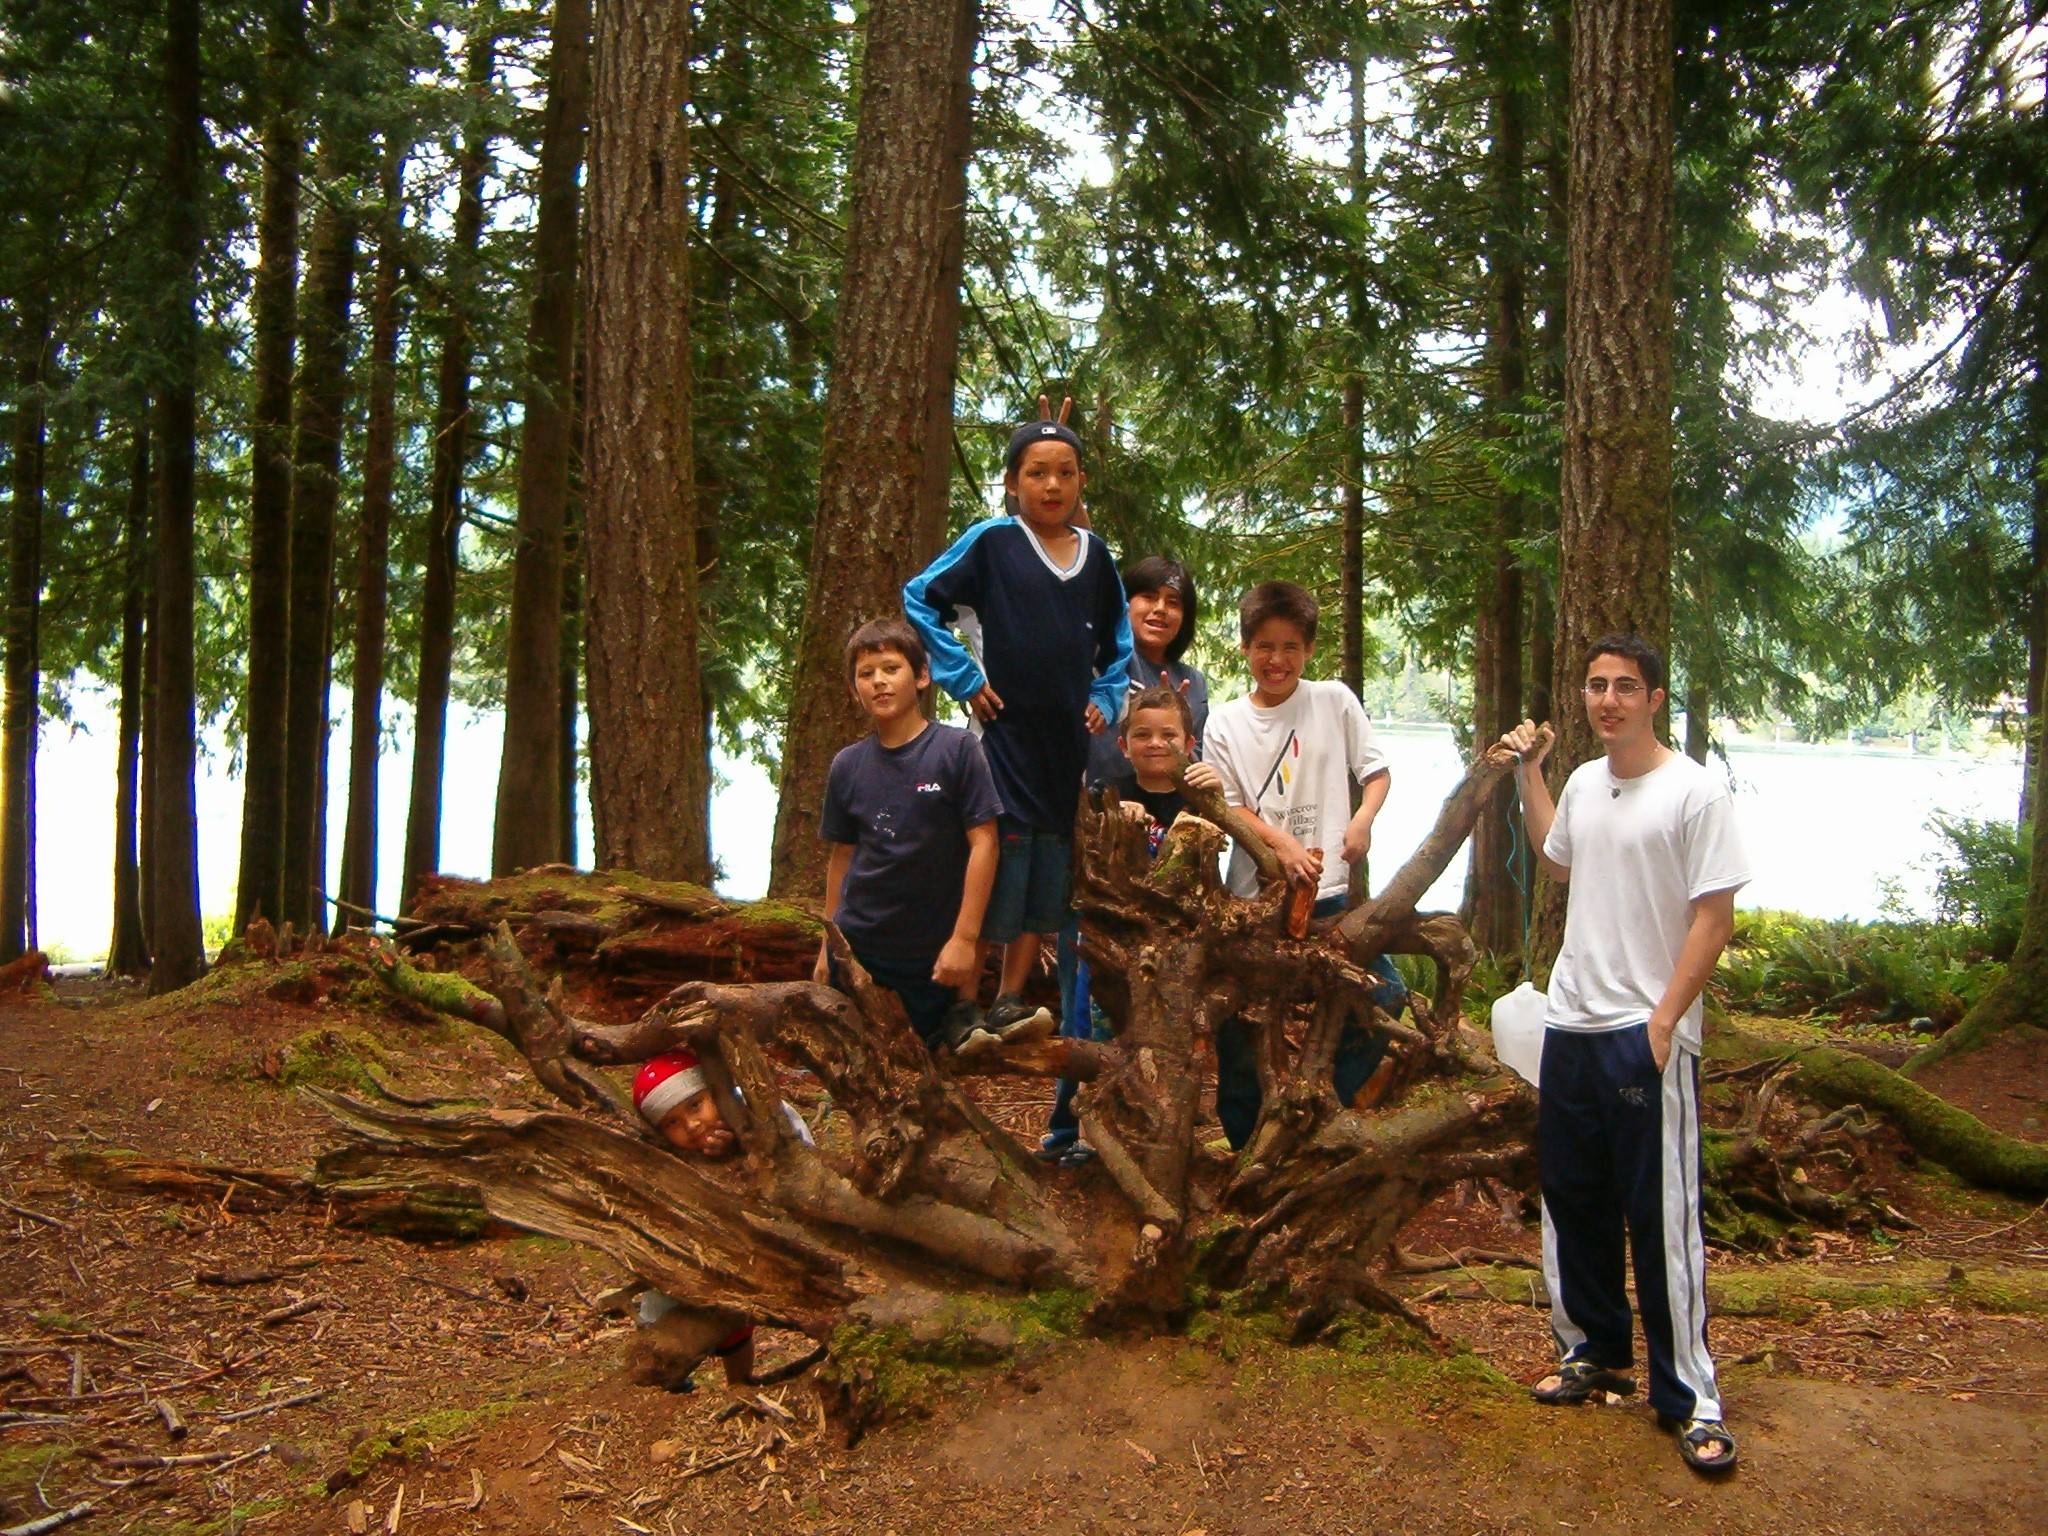 Campers with Fetal Alcohol Syndrome Disorder at a Whitecrow Village Family Camp, where people can experience successful strategies in an interdependent community of families, professionals, and people who live with an FASD. (Photo courtesy of the Whitecrow Village)